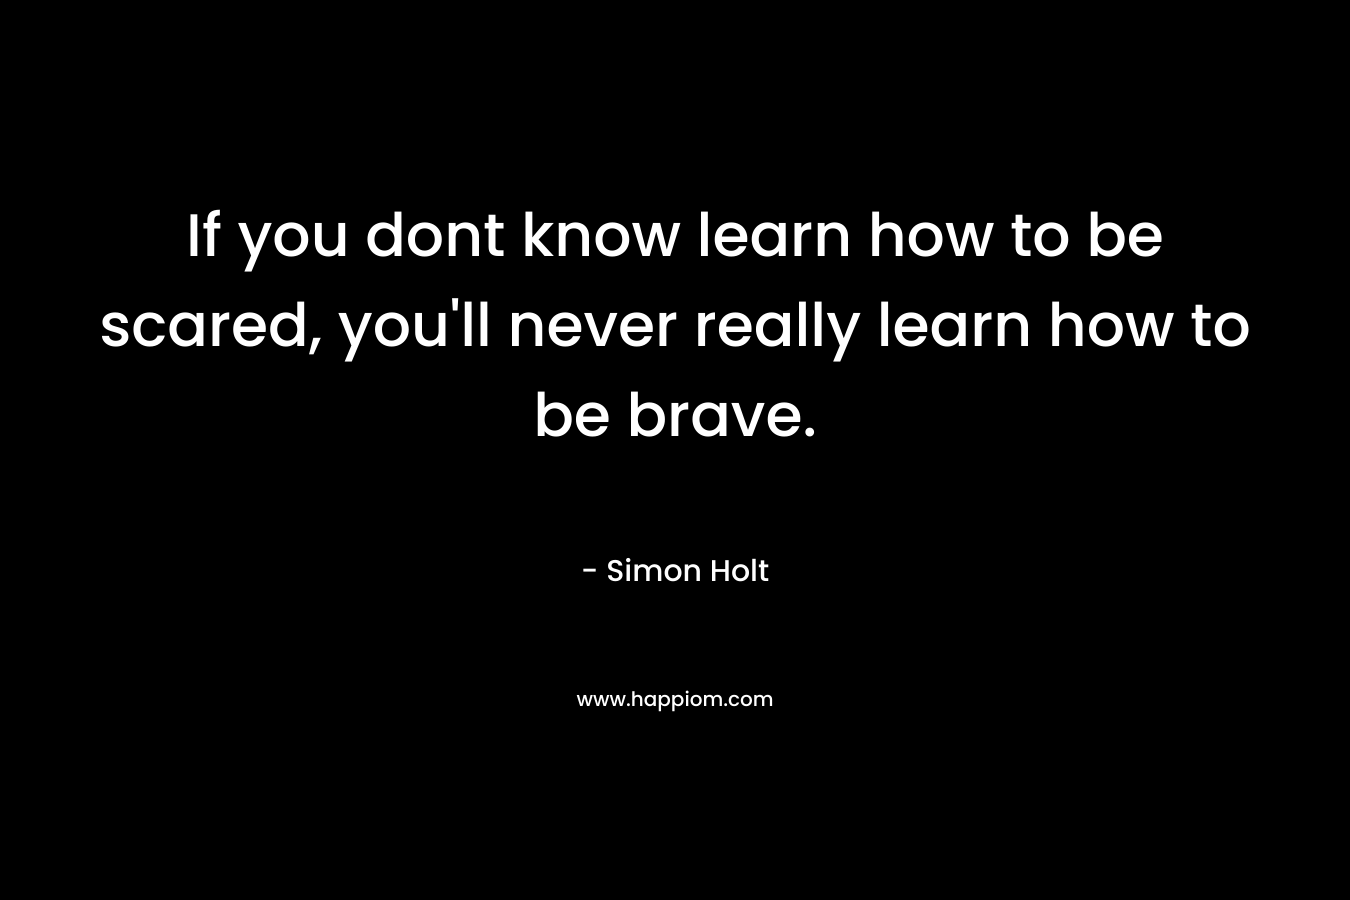 If you dont know learn how to be scared, you'll never really learn how to be brave.